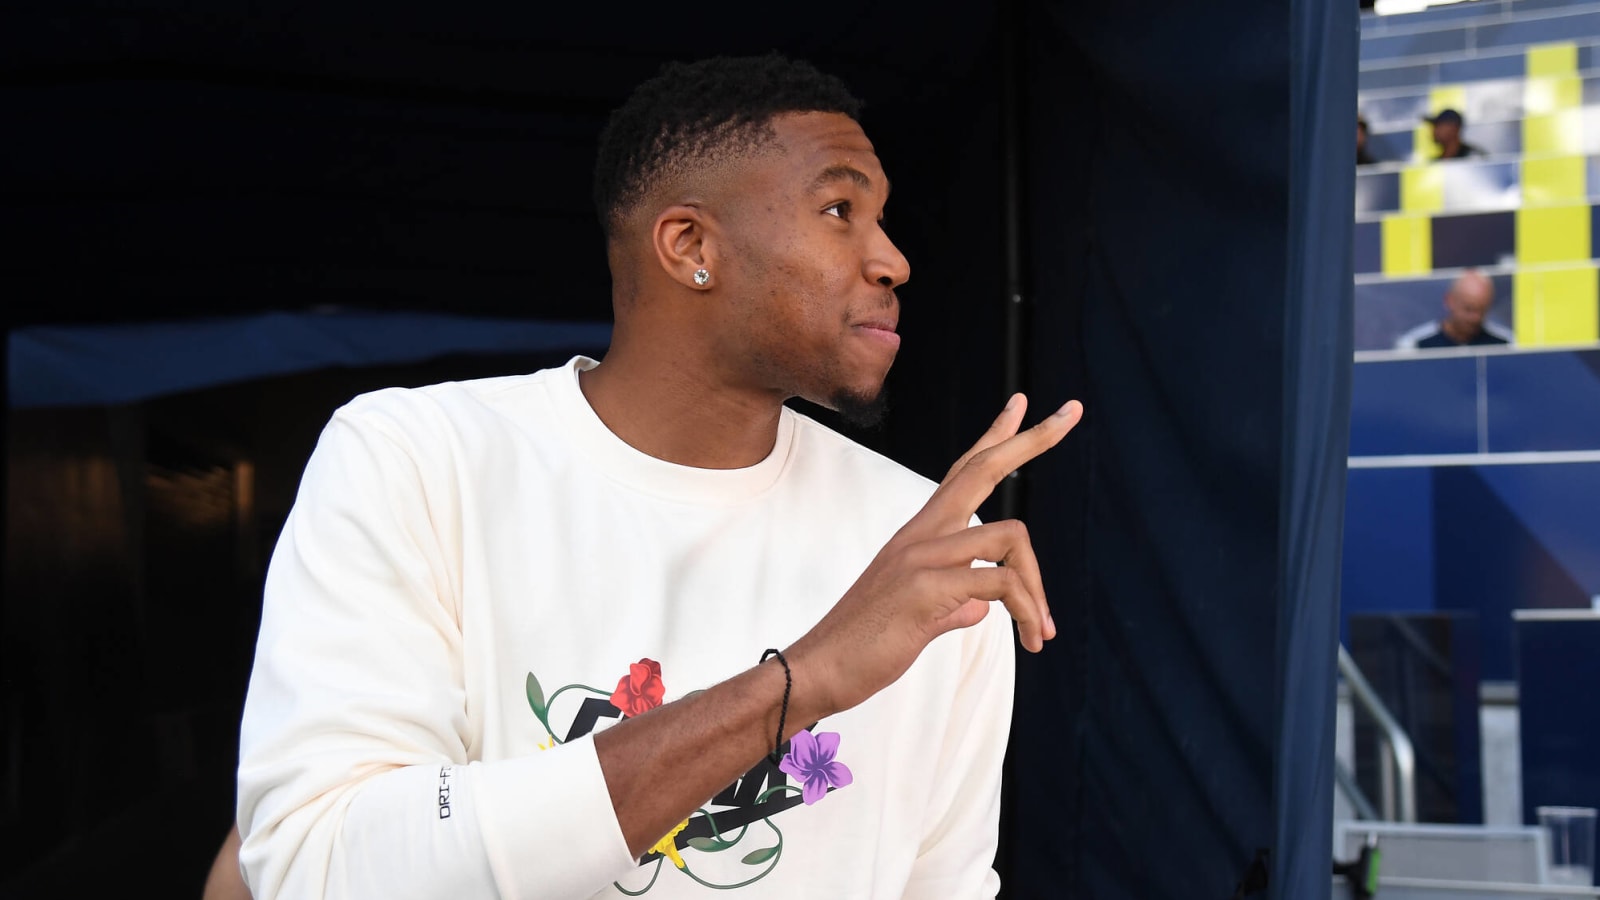 Bucks head coach gets honest on his relationship with Giannis Antetokounmpo